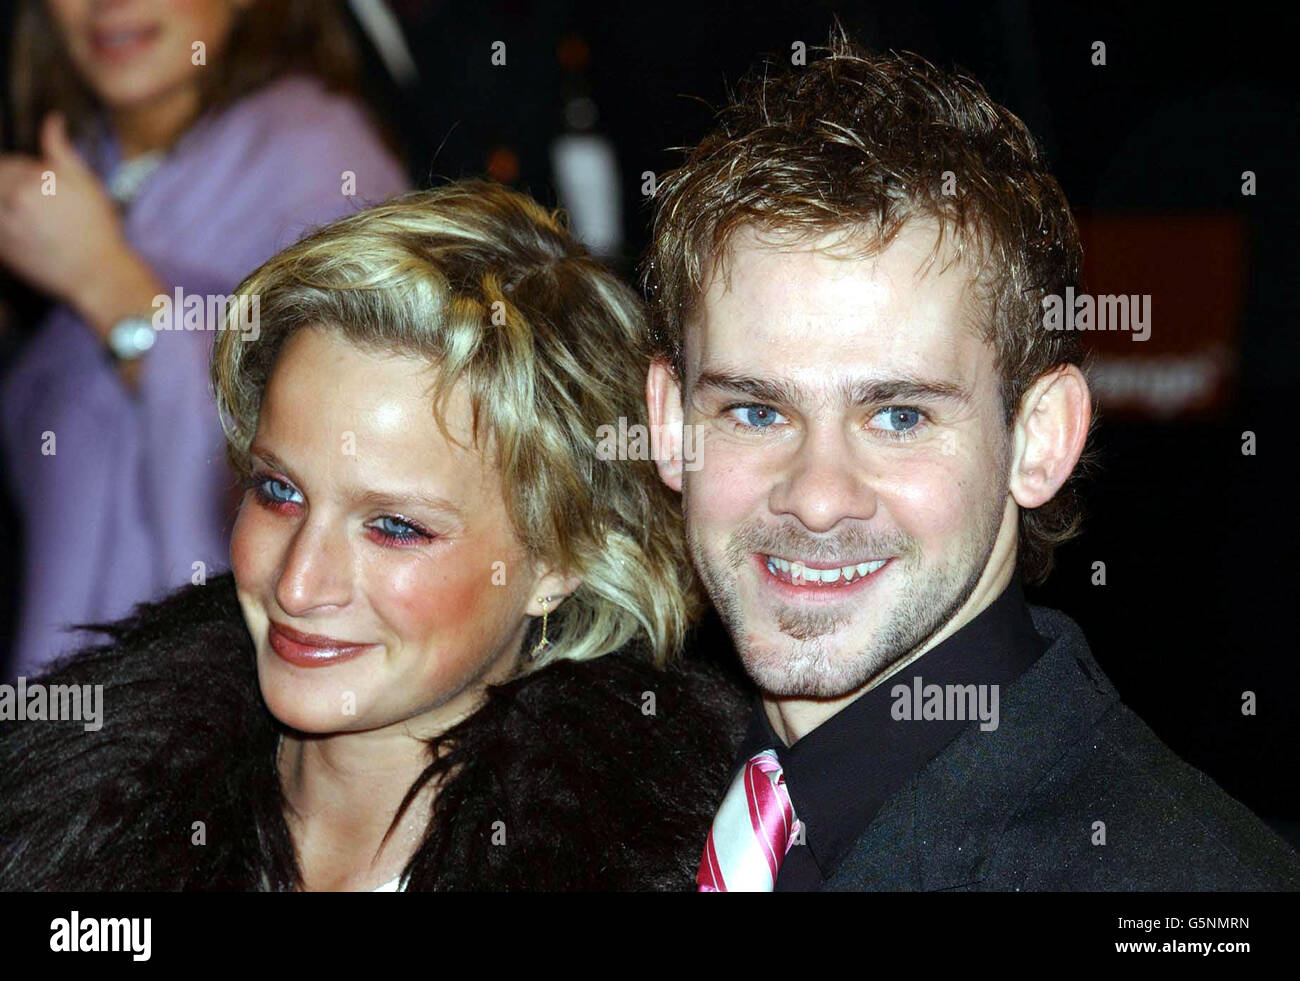 Dominic Monaghan, who plays Merry in The Lord of the Rings, arrives for the  Orange British Academy Film Awards at the Odeon cinema in London's  Leicester Square Stock Photo - Alamy